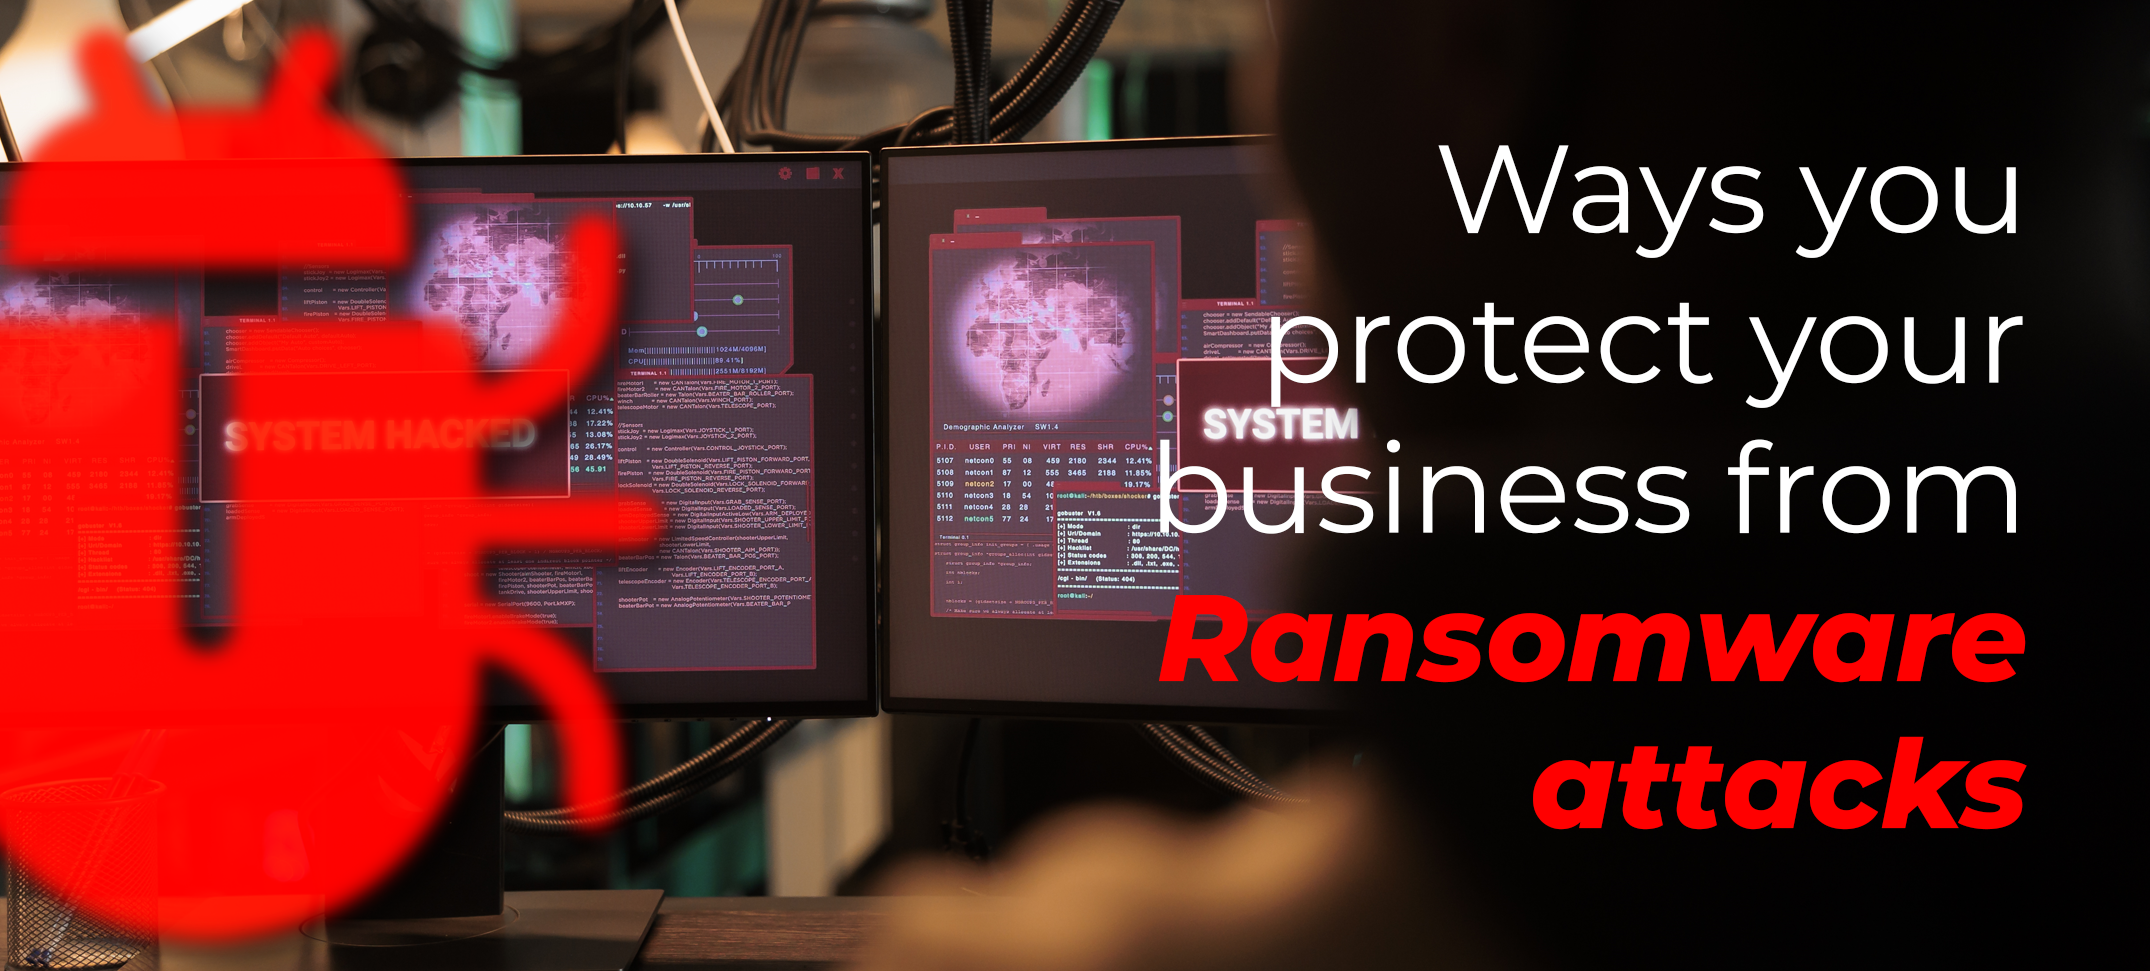 Ways you Protect Your Business from Ransomware Attacks